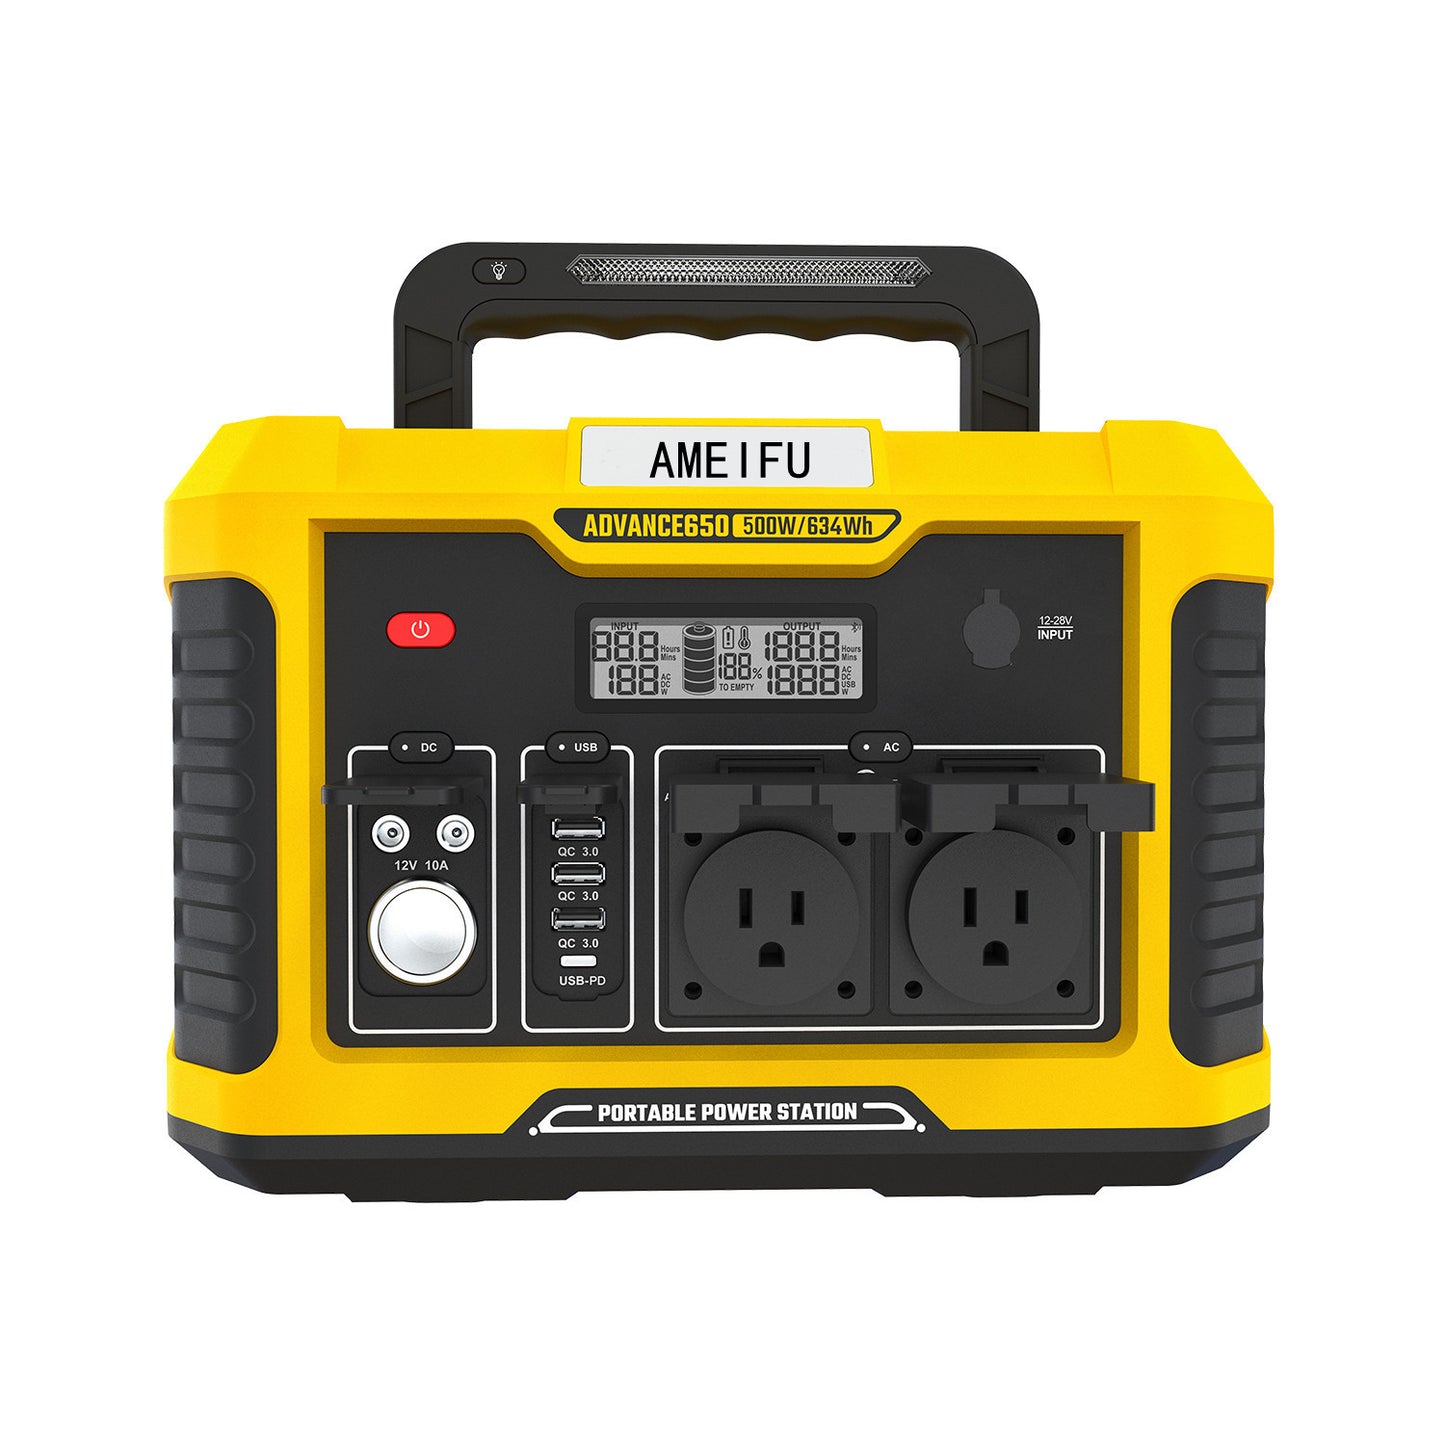 AMEIFU  Portable Power Station, 634Wh  500W (Peak 600W)Backup Lithium Battery, Solar Generator (Solar Panel Not Included) With DC /AC /USB Outlets for Outdoor Camping Travel Emergency Home